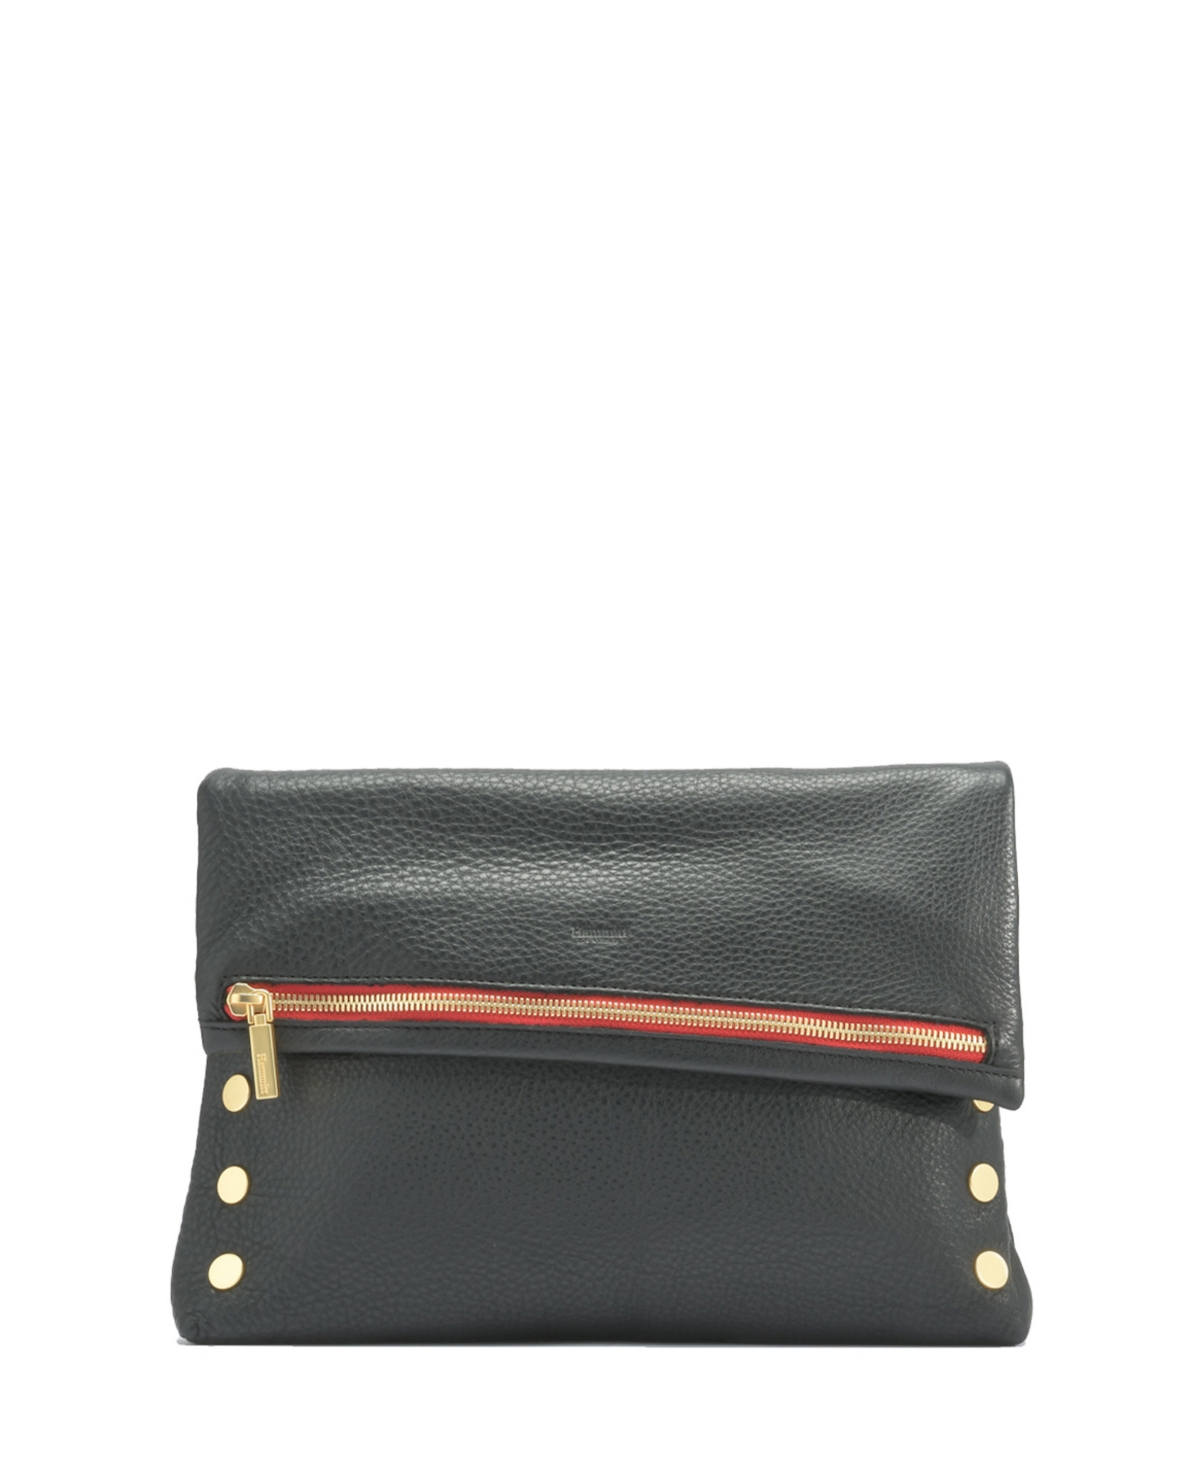 Shop Hammitt Vip Large Leather Crossbody In Black Brushed Gold Red Zip